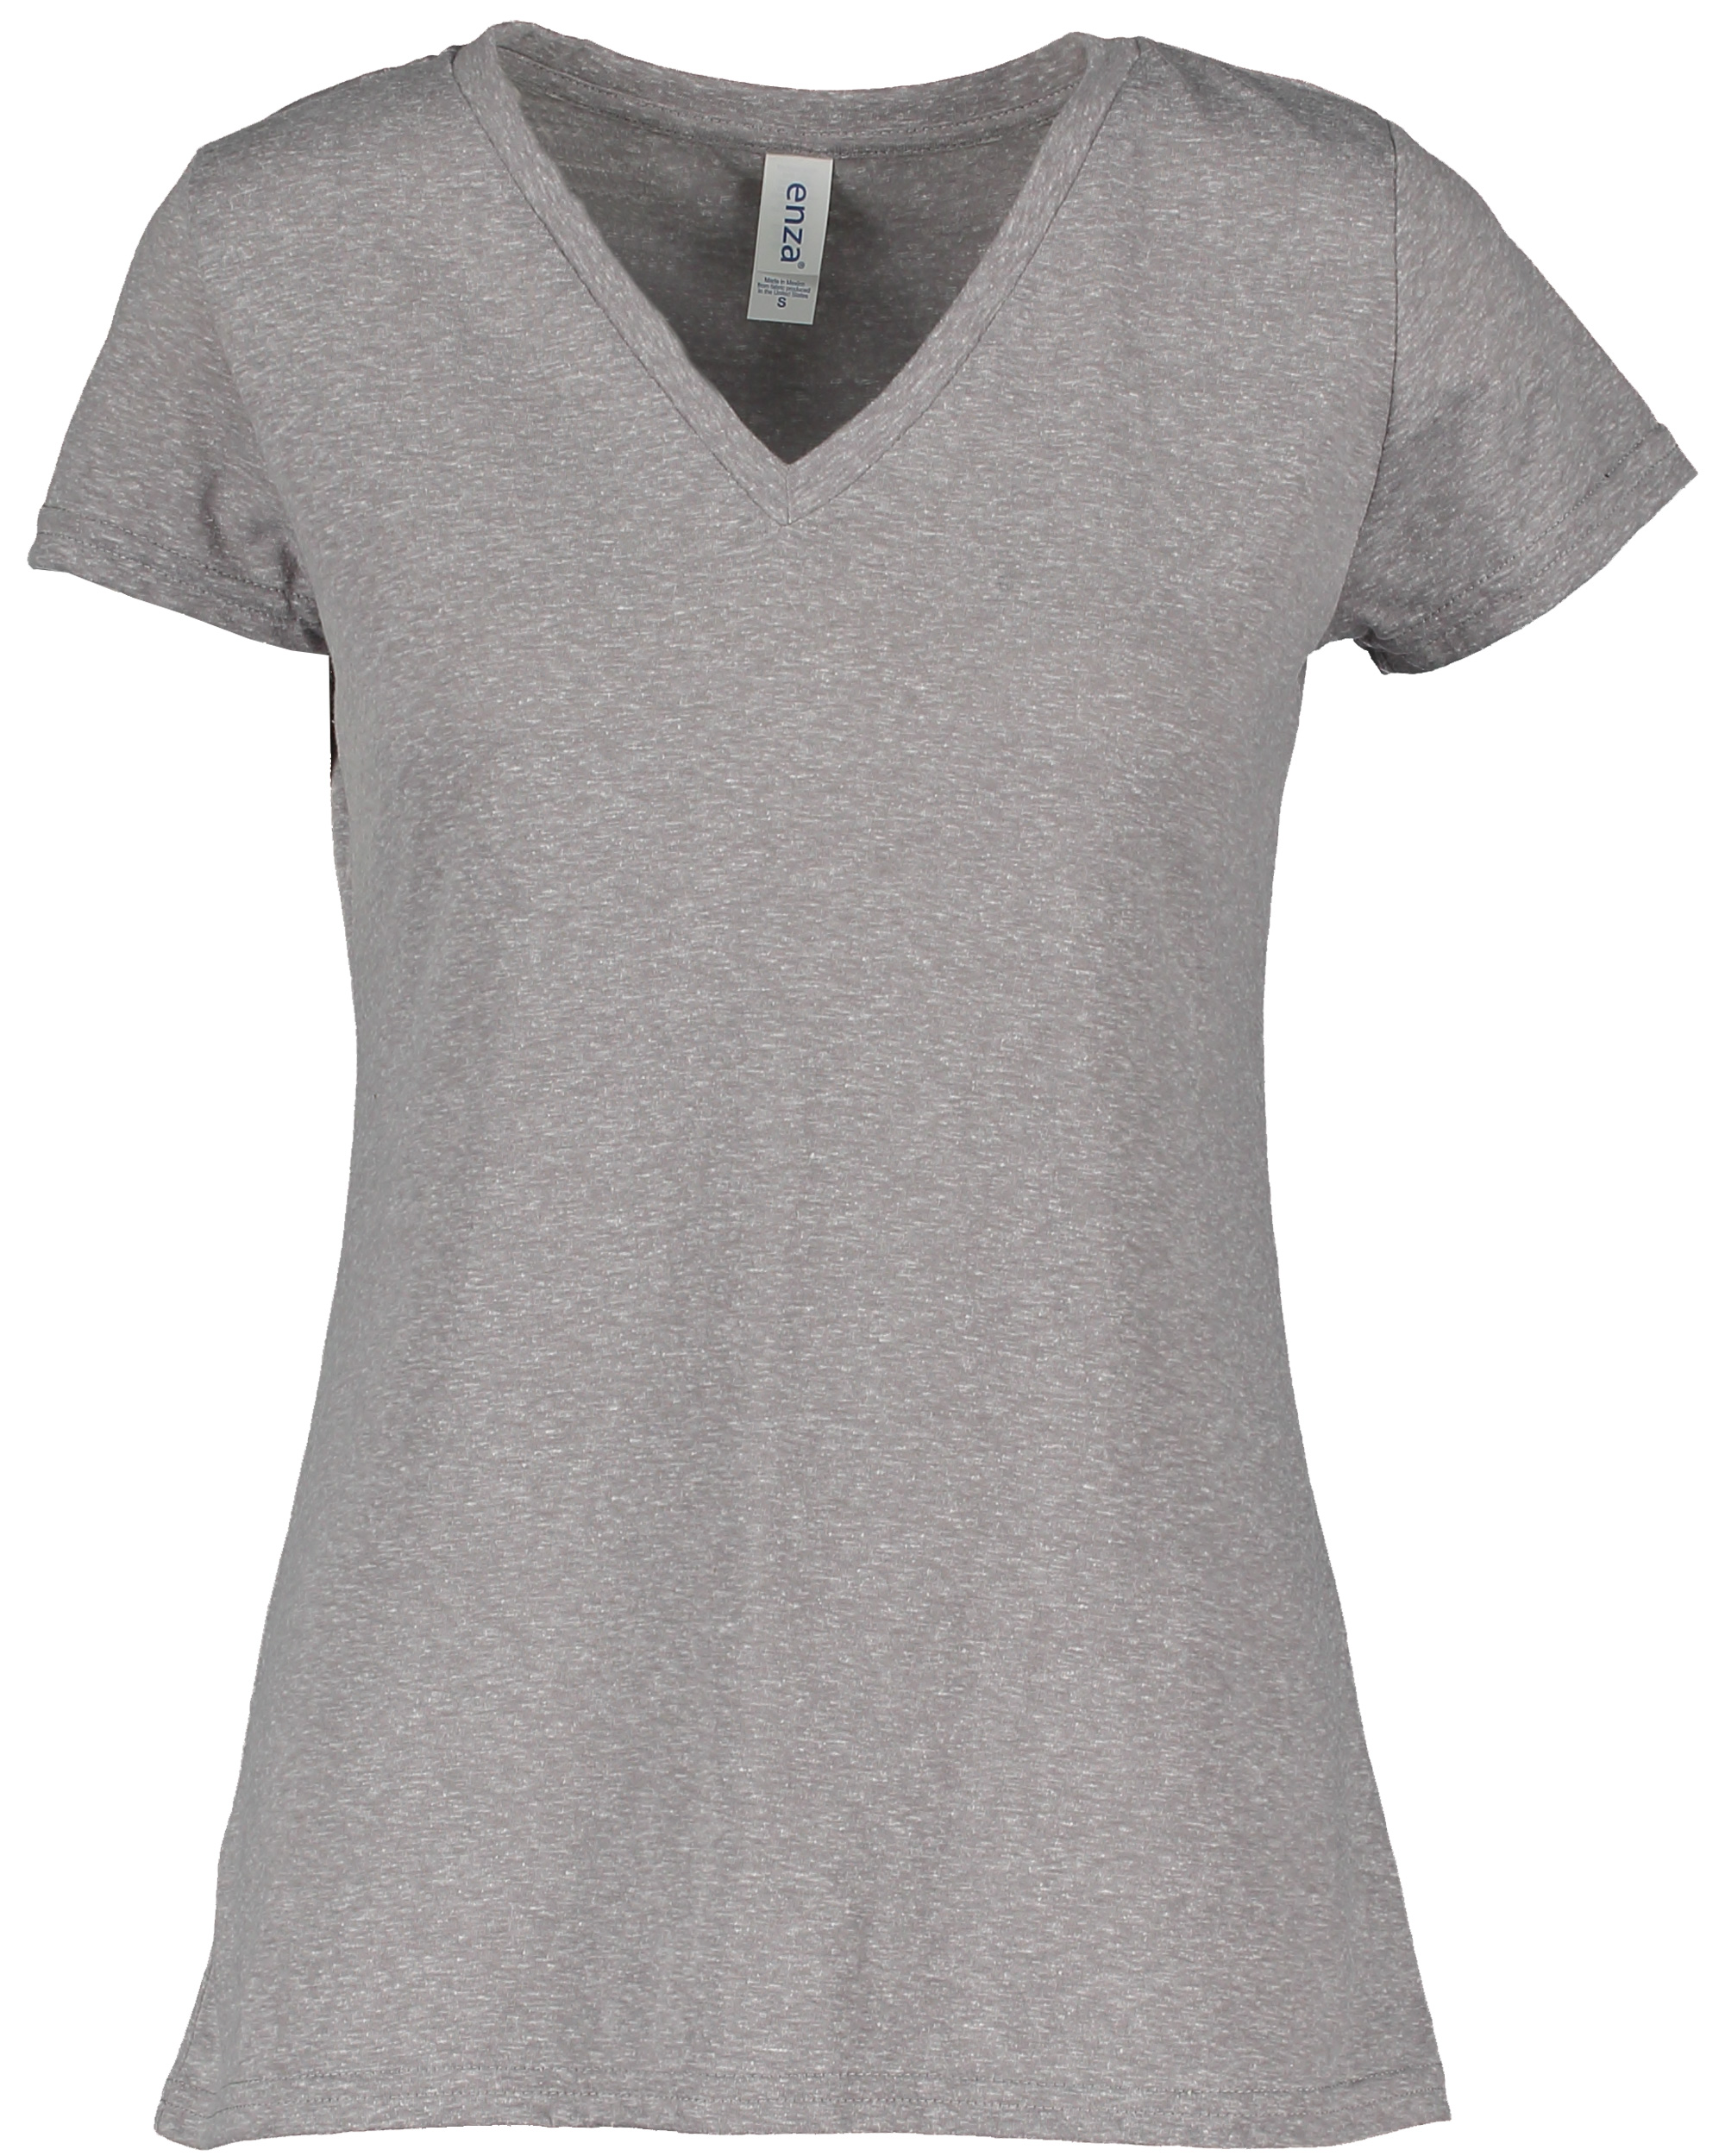 Enza® 01279 Ladies Mélange V-Neck Tee, shown in Athletic Heather